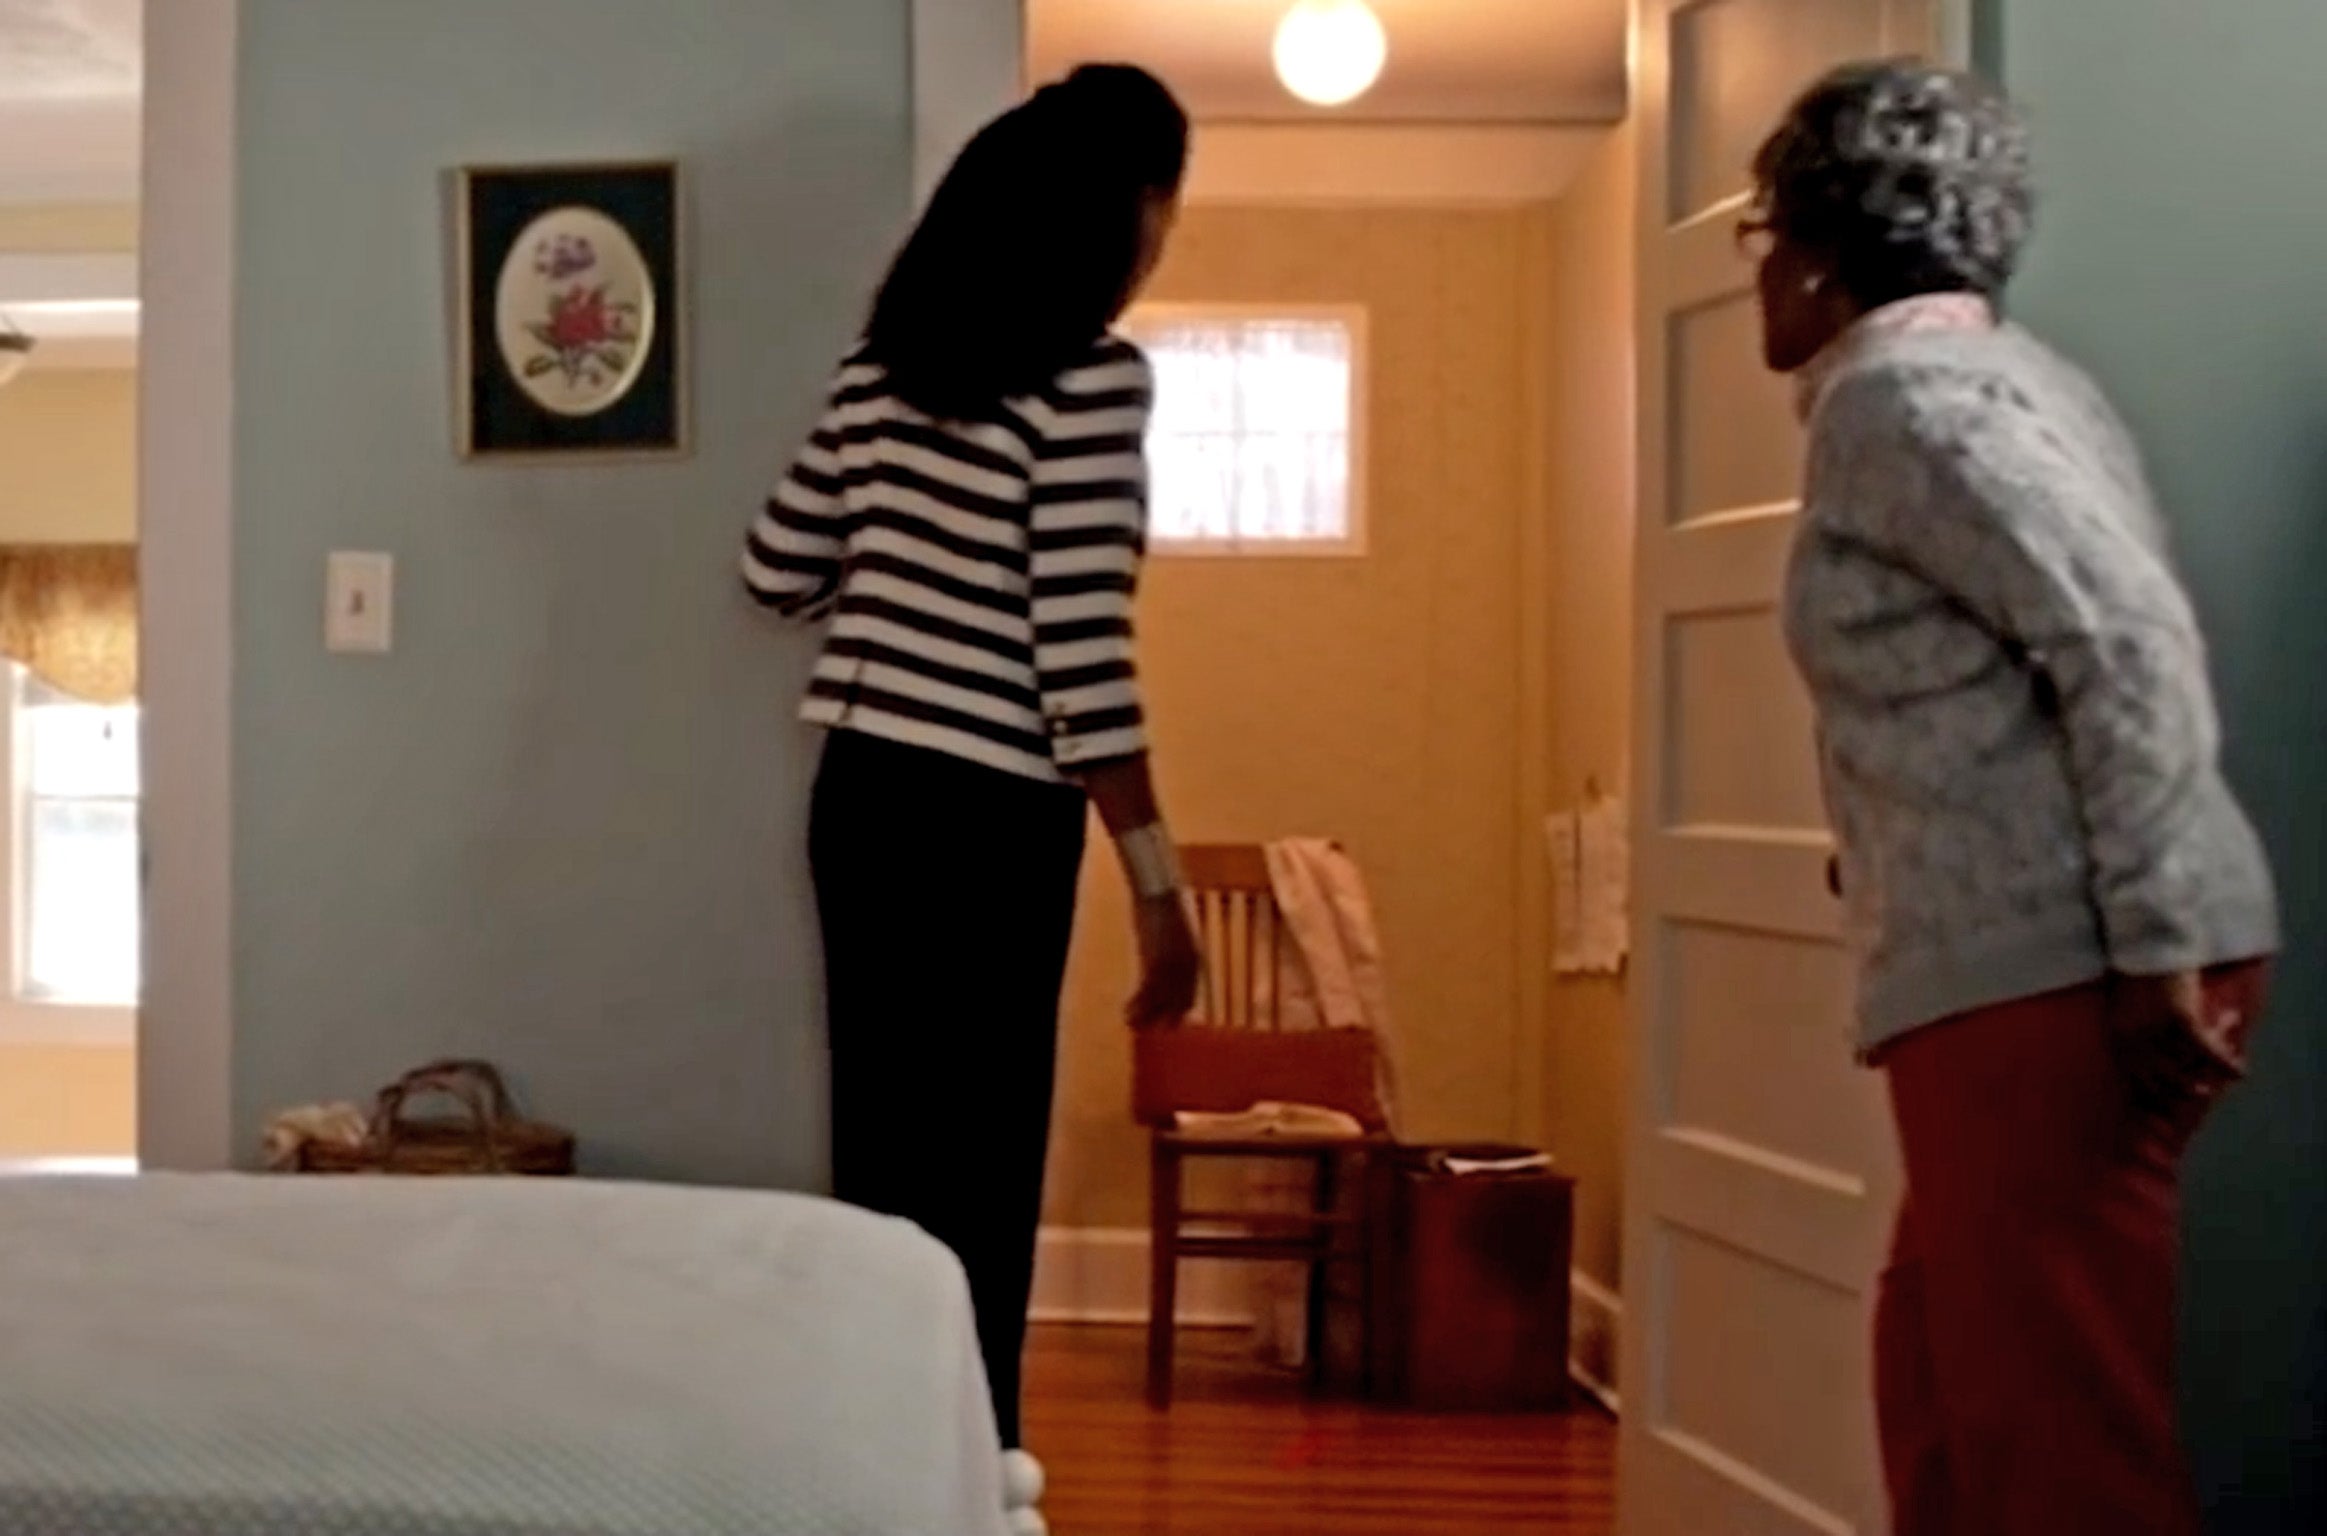 Karen Abercrombie as Miss Clara shows Elizabeth Jordan, played by Priscilla Shirer, her closet that she has dedicated to praying in ‘War Room’ (2015) – a film which topped the US box office in 2015, making $73 million from a $3 million budget.